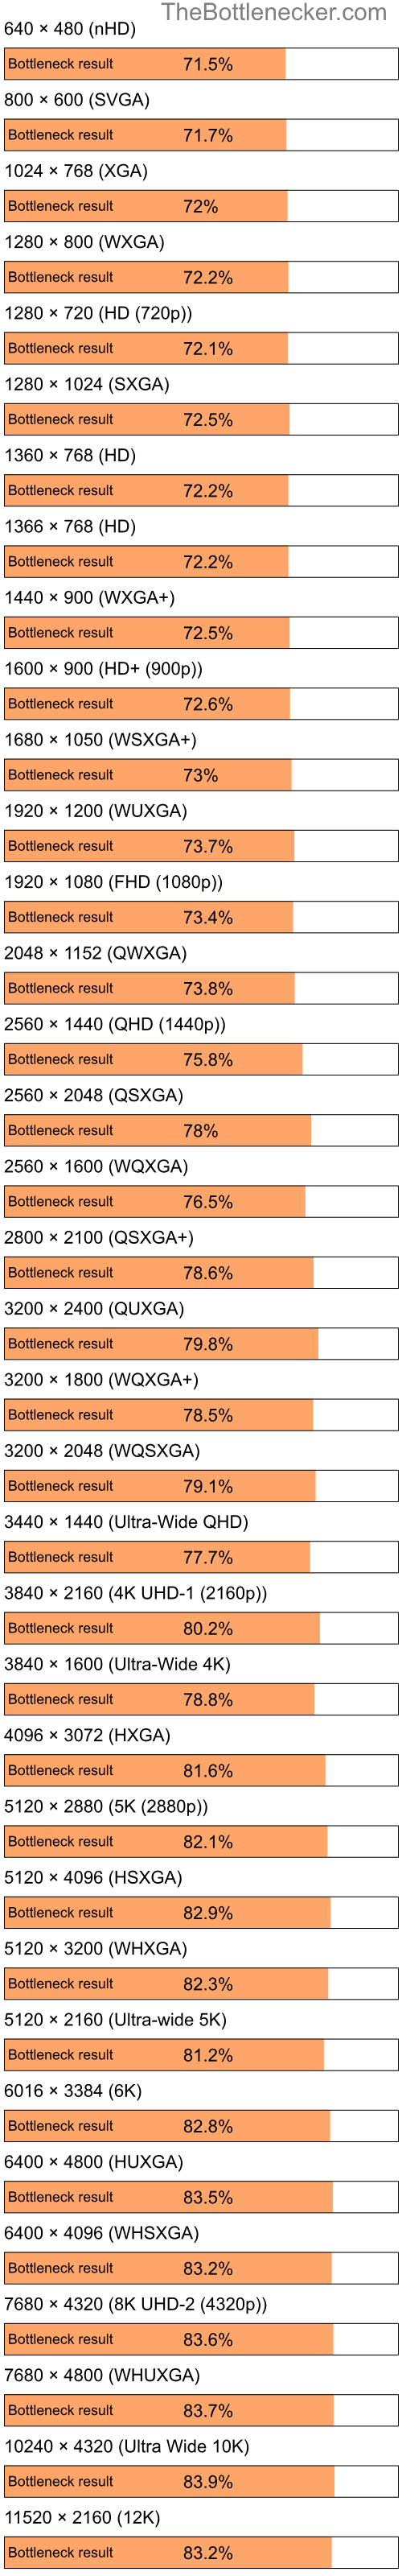 Bottleneck results by resolution for Intel Pentium 4 and NVIDIA GeForce 6200 A-LE in Processor Intense Tasks